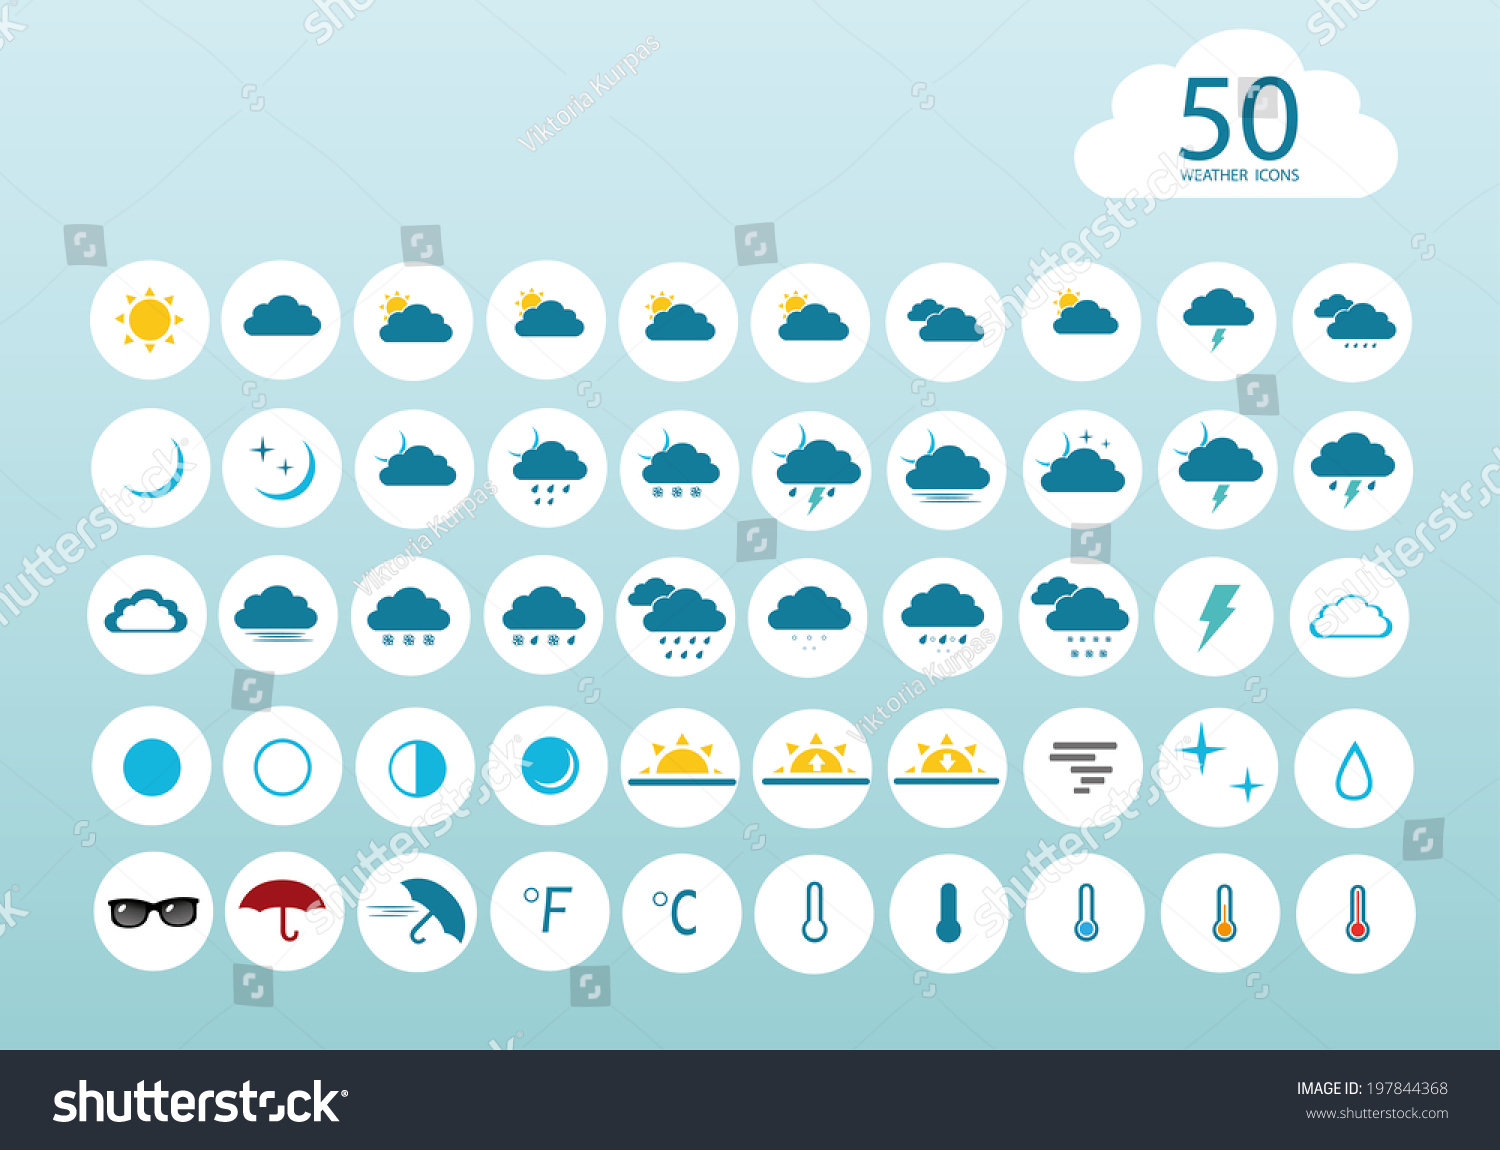 vector illustration of color weather icons on a blue background #197844368